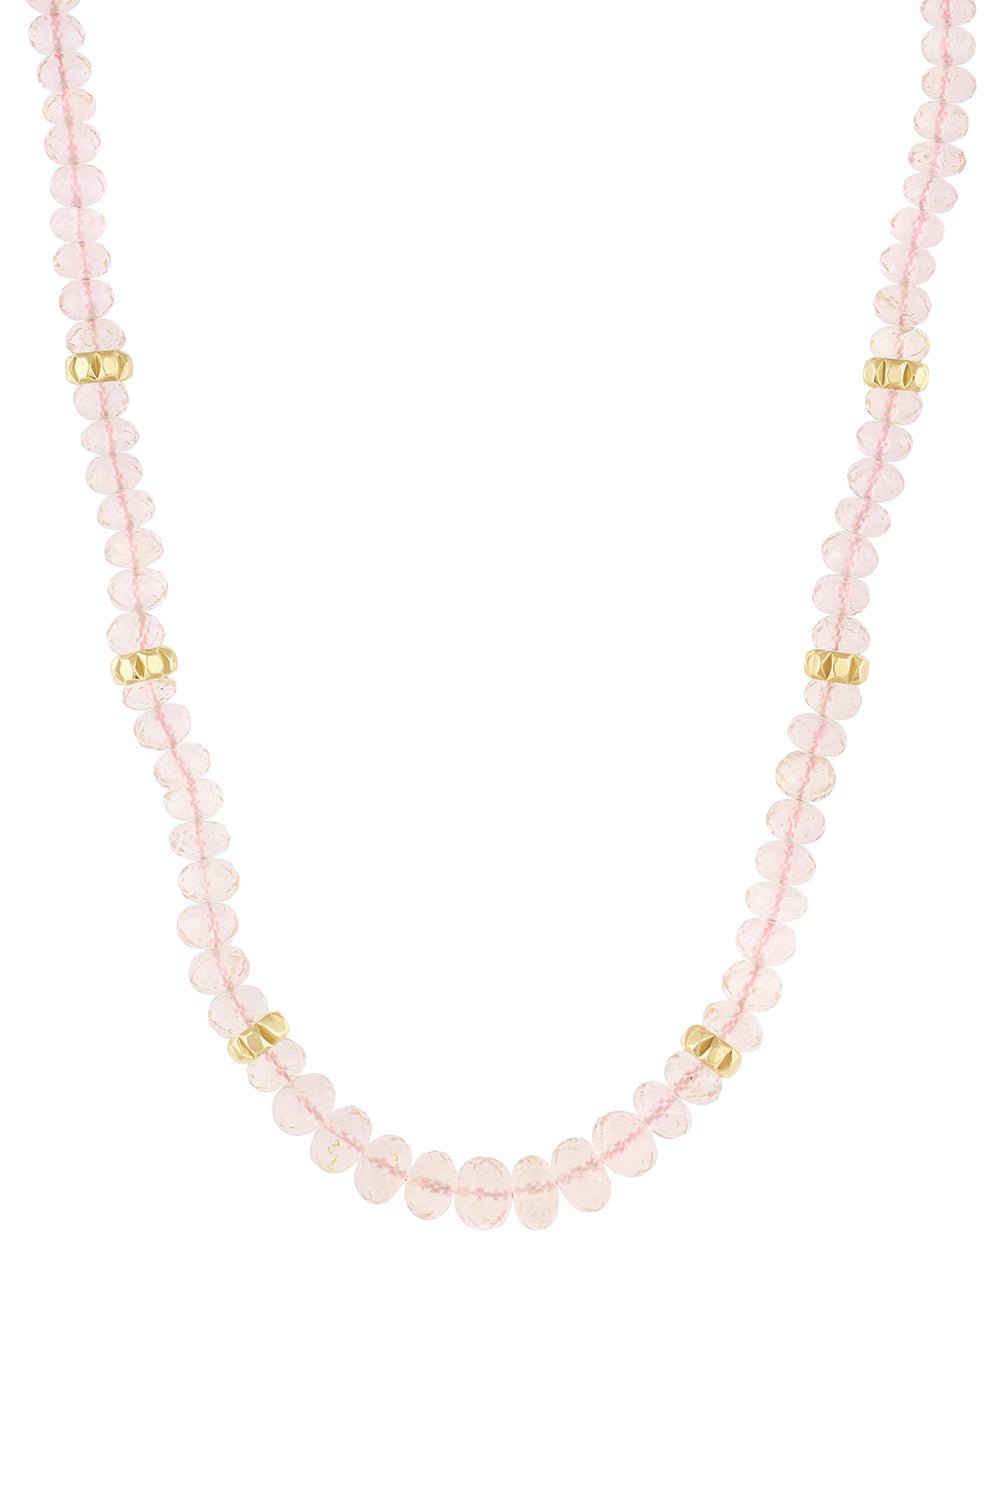 MEREDITH YOUNG-Blush Morganite Bead Necklace-YELLOW GOLD